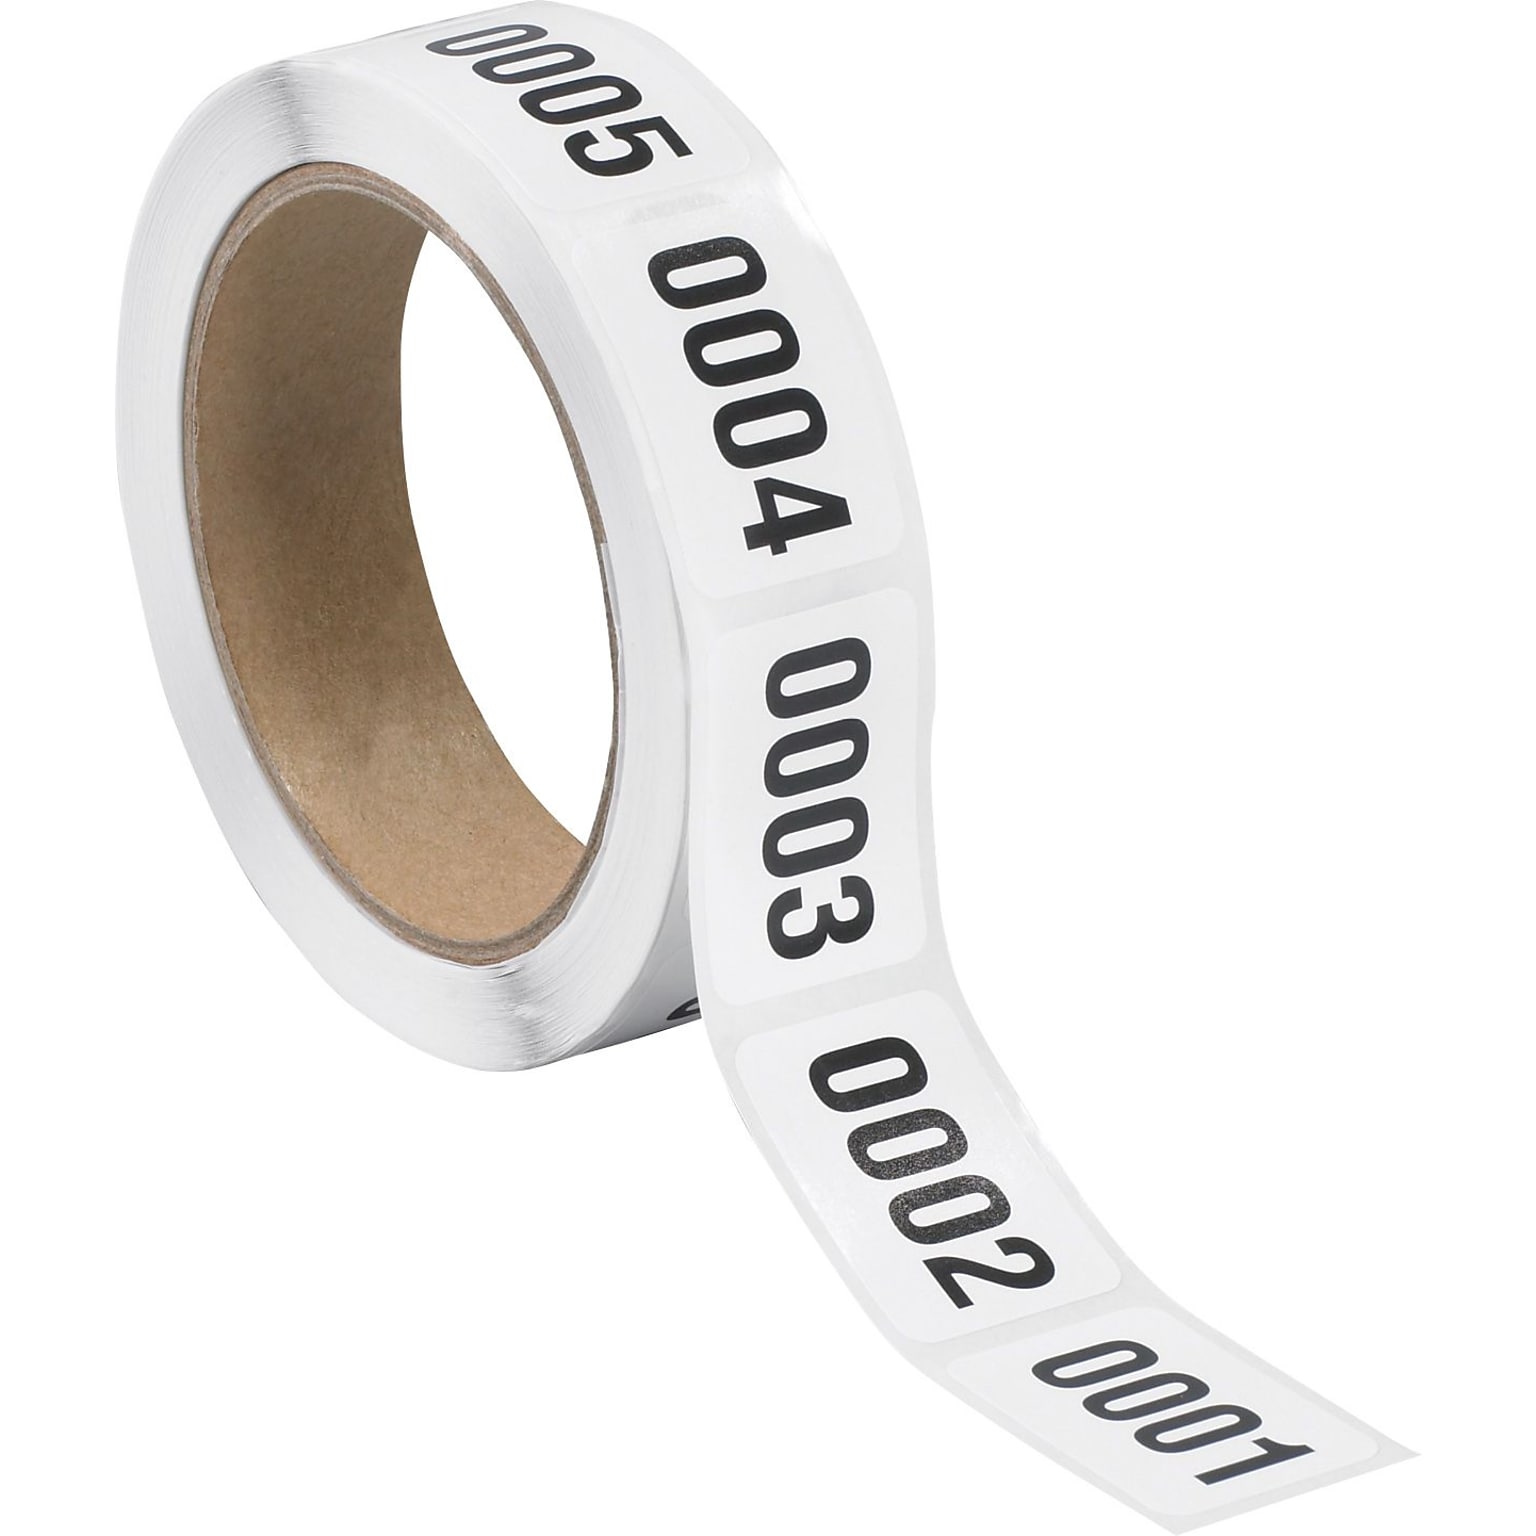 Tape Logic 1 x 1 1/2 Consecutive Numbered Labels, White (0001-0500), 500/Roll